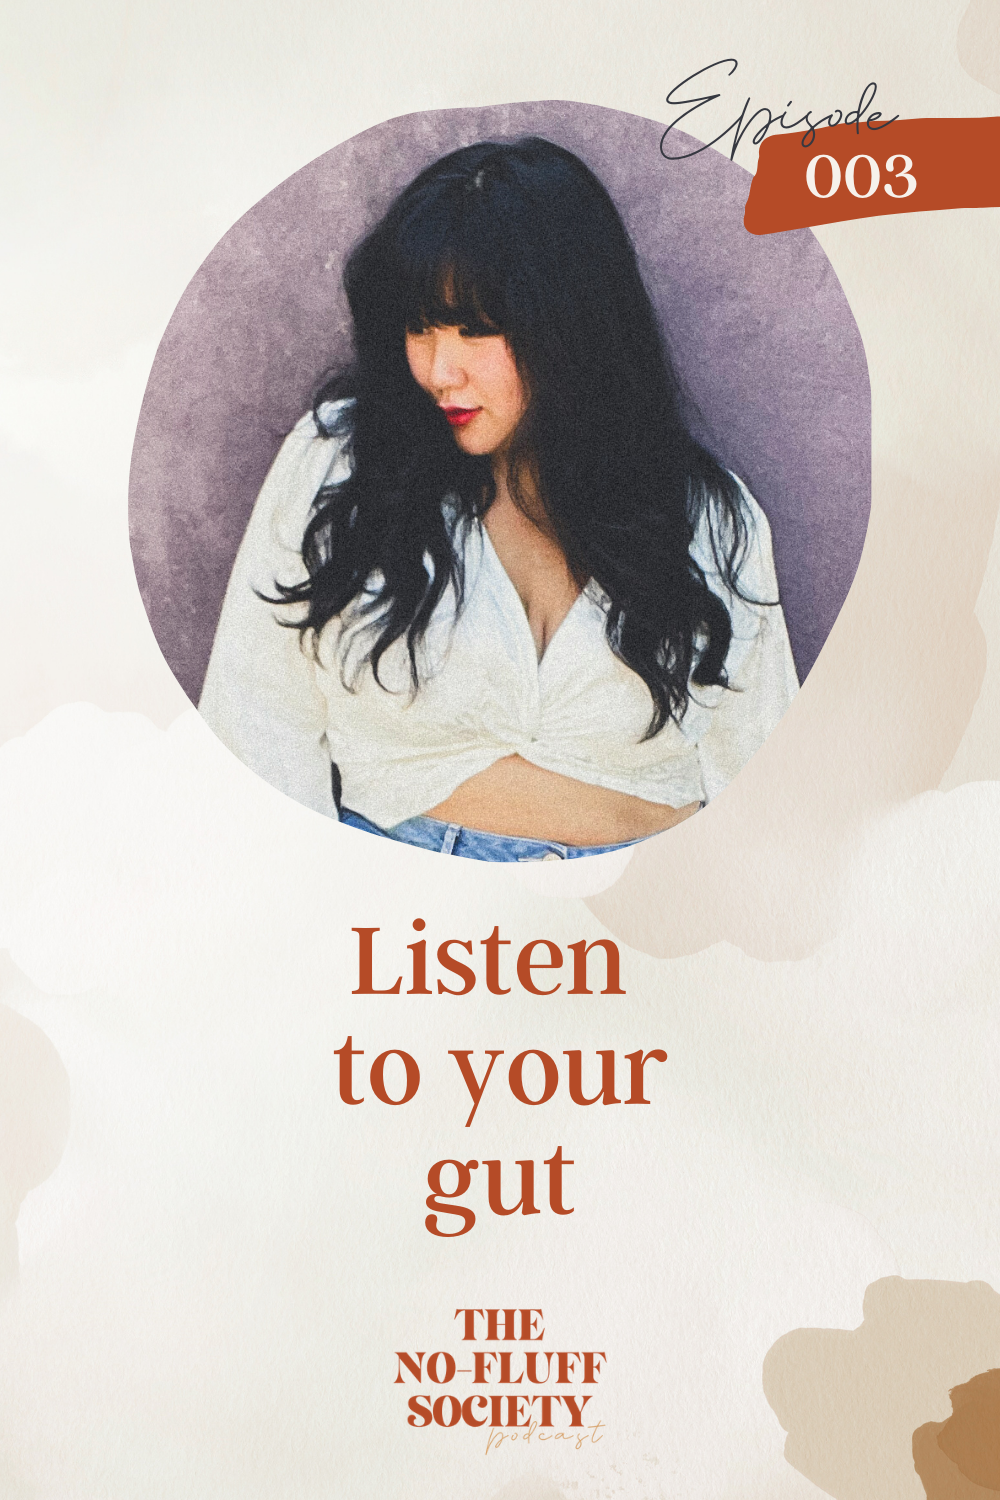 Listen to your GUT